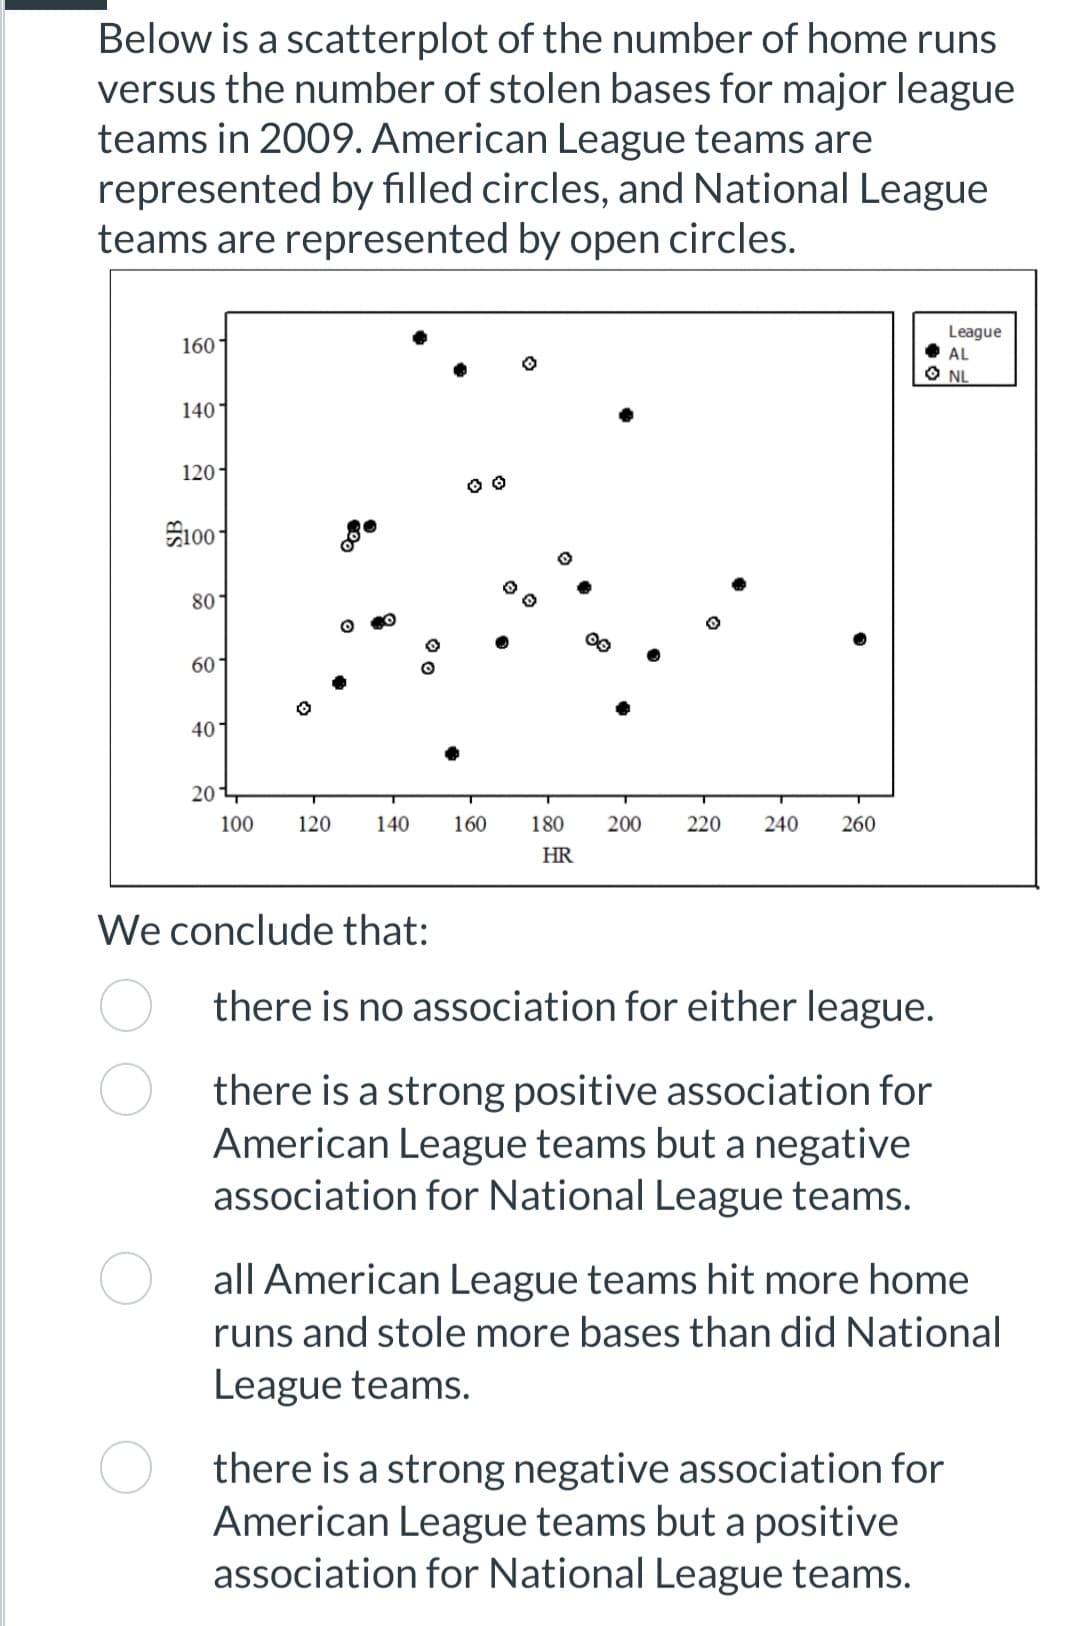 Below is a scatterplot of the number of home runs
versus the number of stolen bases for major league
teams in 2009. American League teams are
represented by filled circles, and National League
teams are represented by open circles.
160
League
AL
NL
140
120
100
80
80
60
40
20
120 140 160 180 200
220 240 260
HR
there is no association for either league.
there is a strong positive association for
American League teams but a negative
association for National League teams.
all American League teams hit more home
runs and stole more bases than did National
League teams.
there is a strong negative association for
American League teams but a positive
association for National League teams.
100
We conclude that: